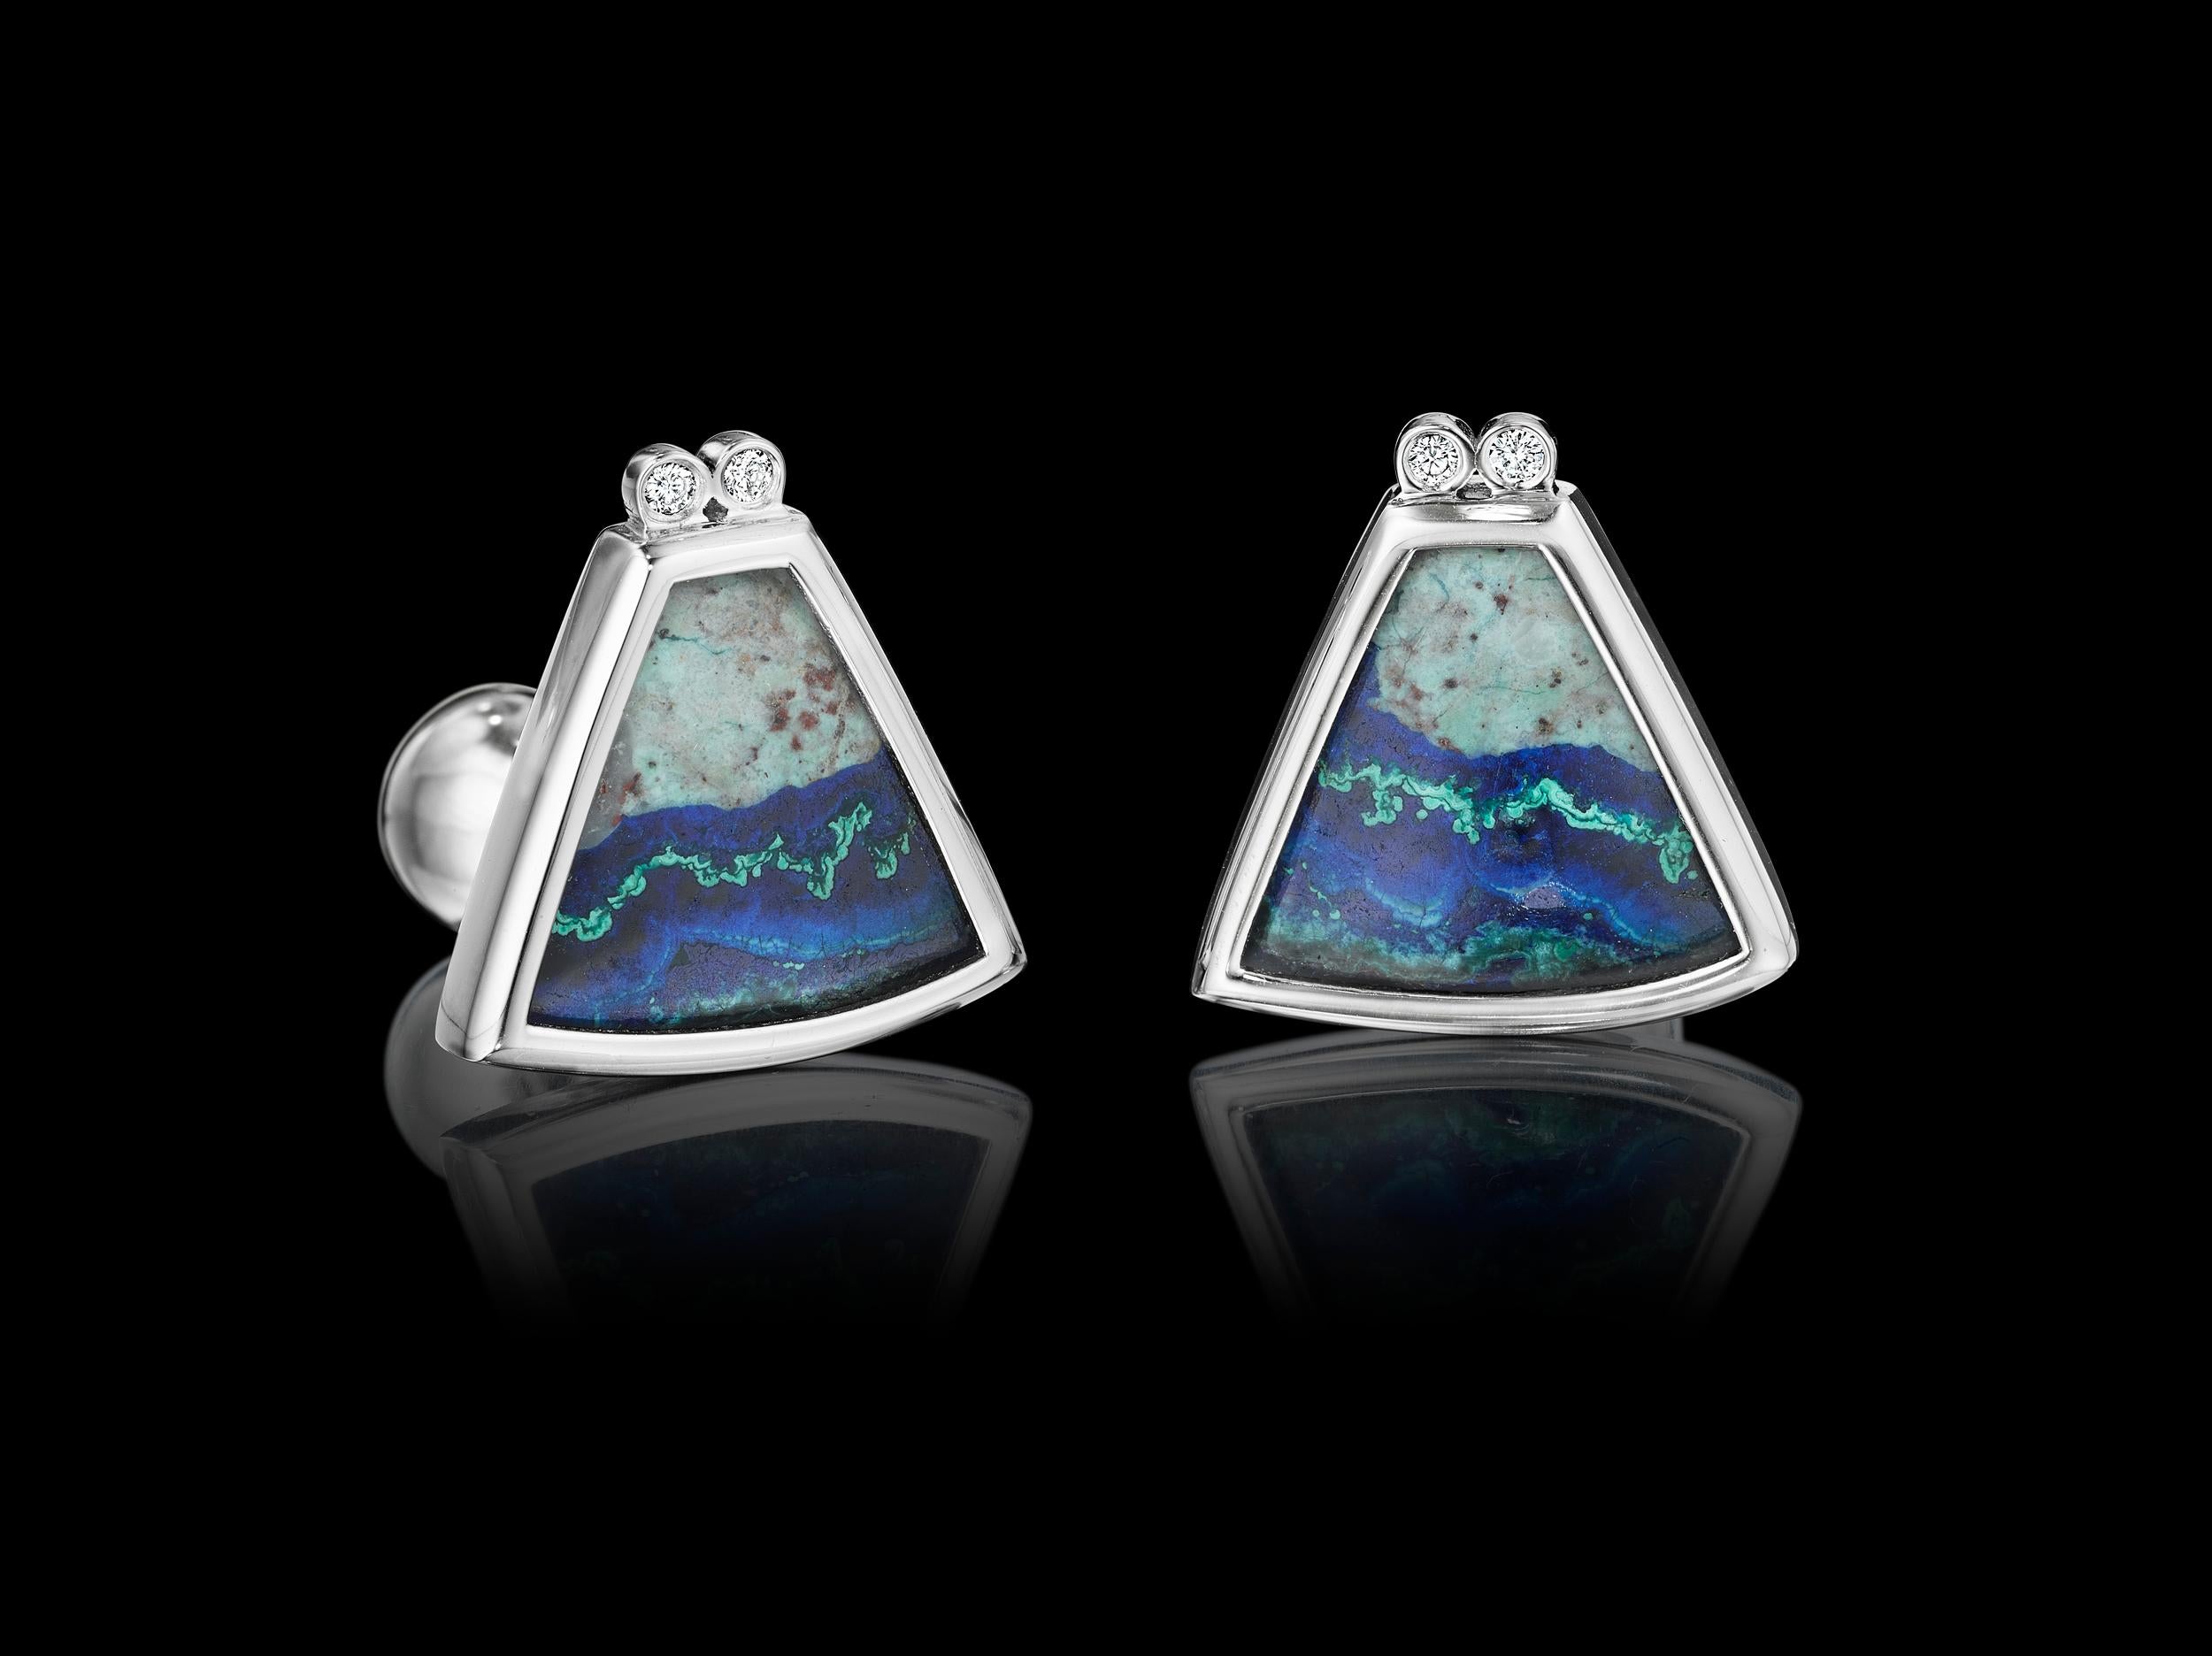 One-of-a-kind Platinum Cufflinks YOKI design, features Diamond (0.1cts. approx.) and Azurite Malachite (14.6cts approx.) set in Platinum. 

Dimensions: 2.1mm face length x 2.0mm face width (approximately)

Style: Cufflinks: Ball return back

This